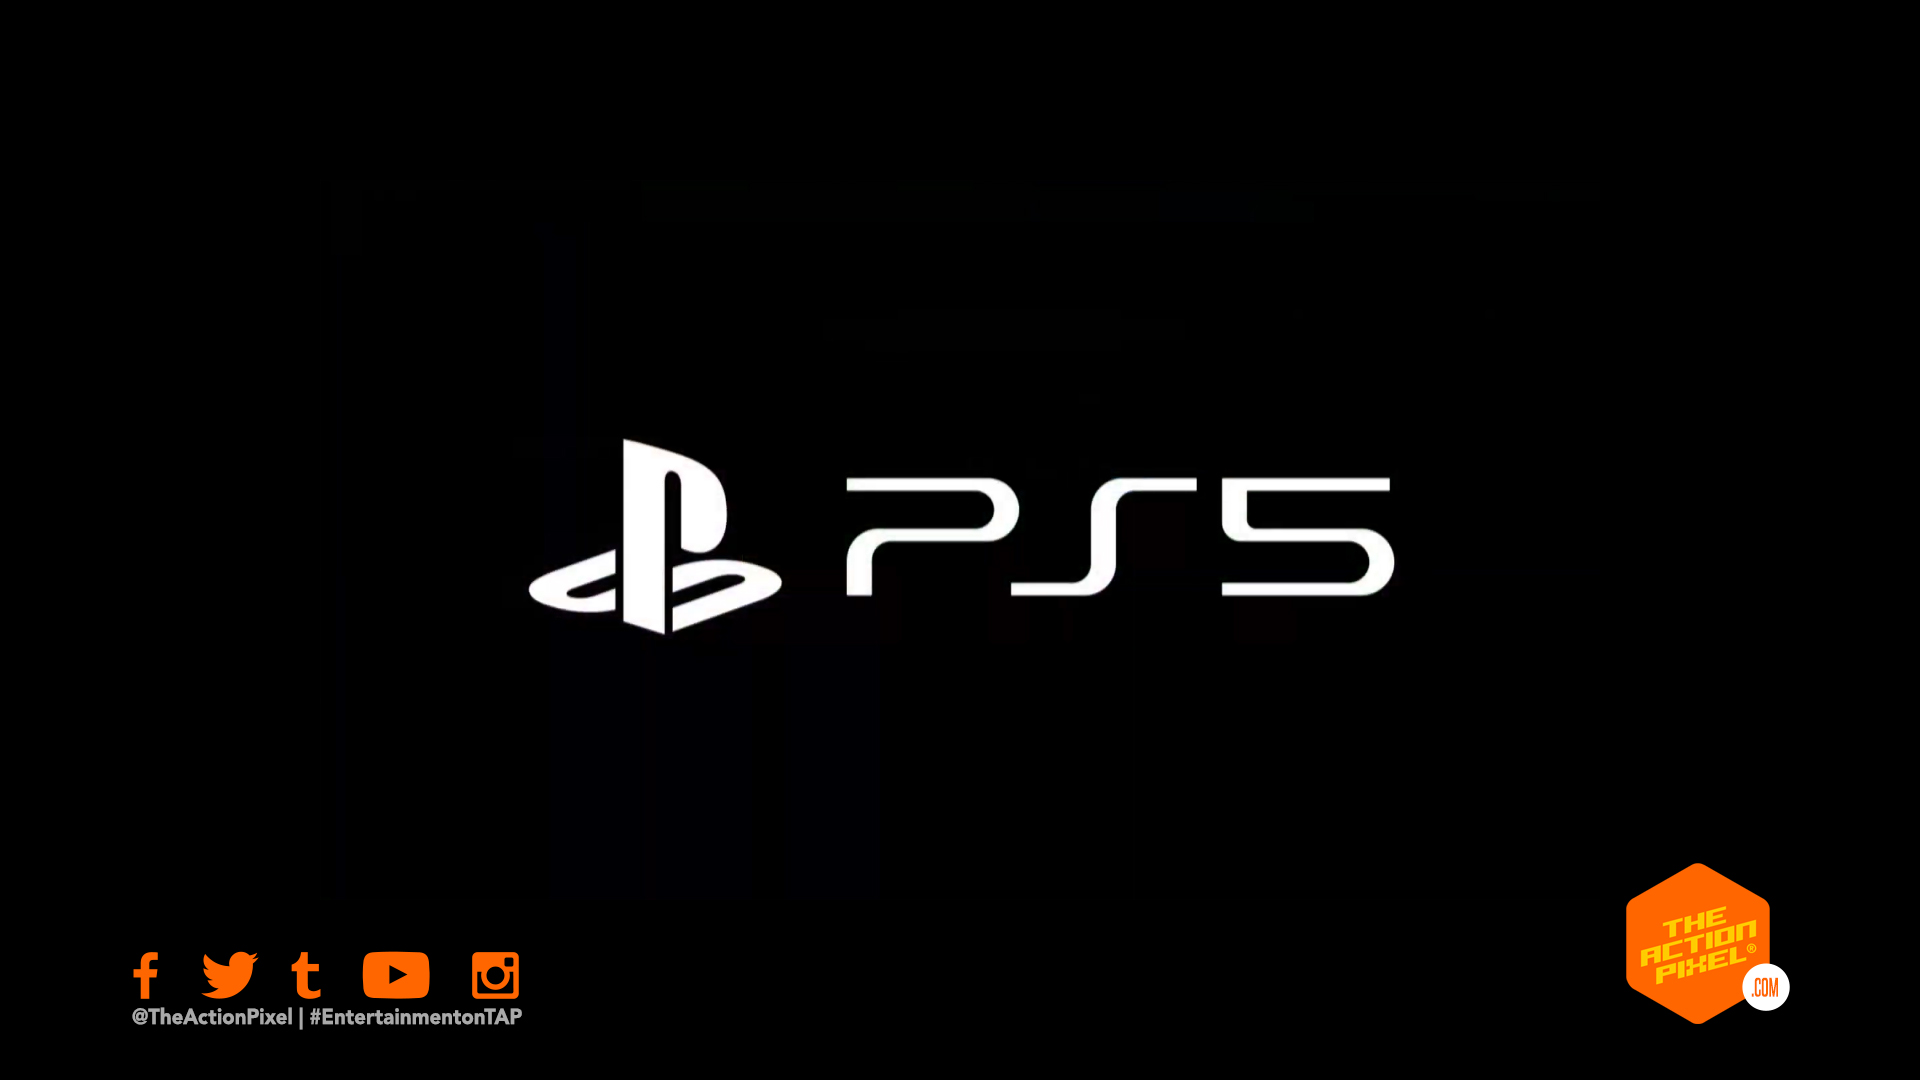 playstation 5, playstation,ps5,sony, jim ryan, CES 2020, the action pixel, entertainment on tap